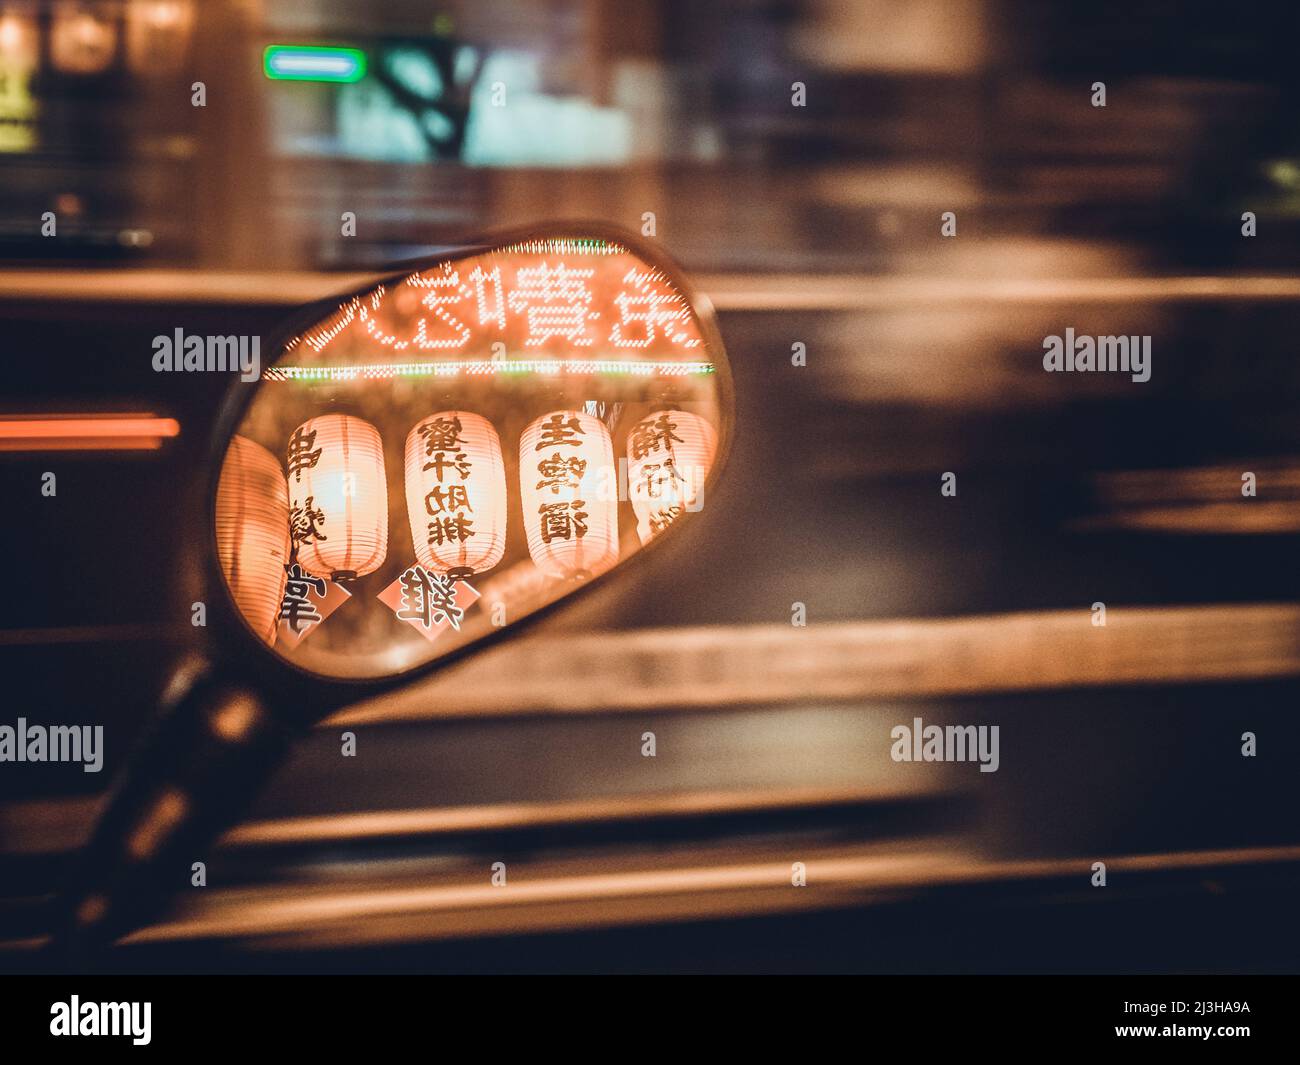 Reflections of lanterns and signs in a side-view mirror, with light trails in background, Taipei Stock Photo